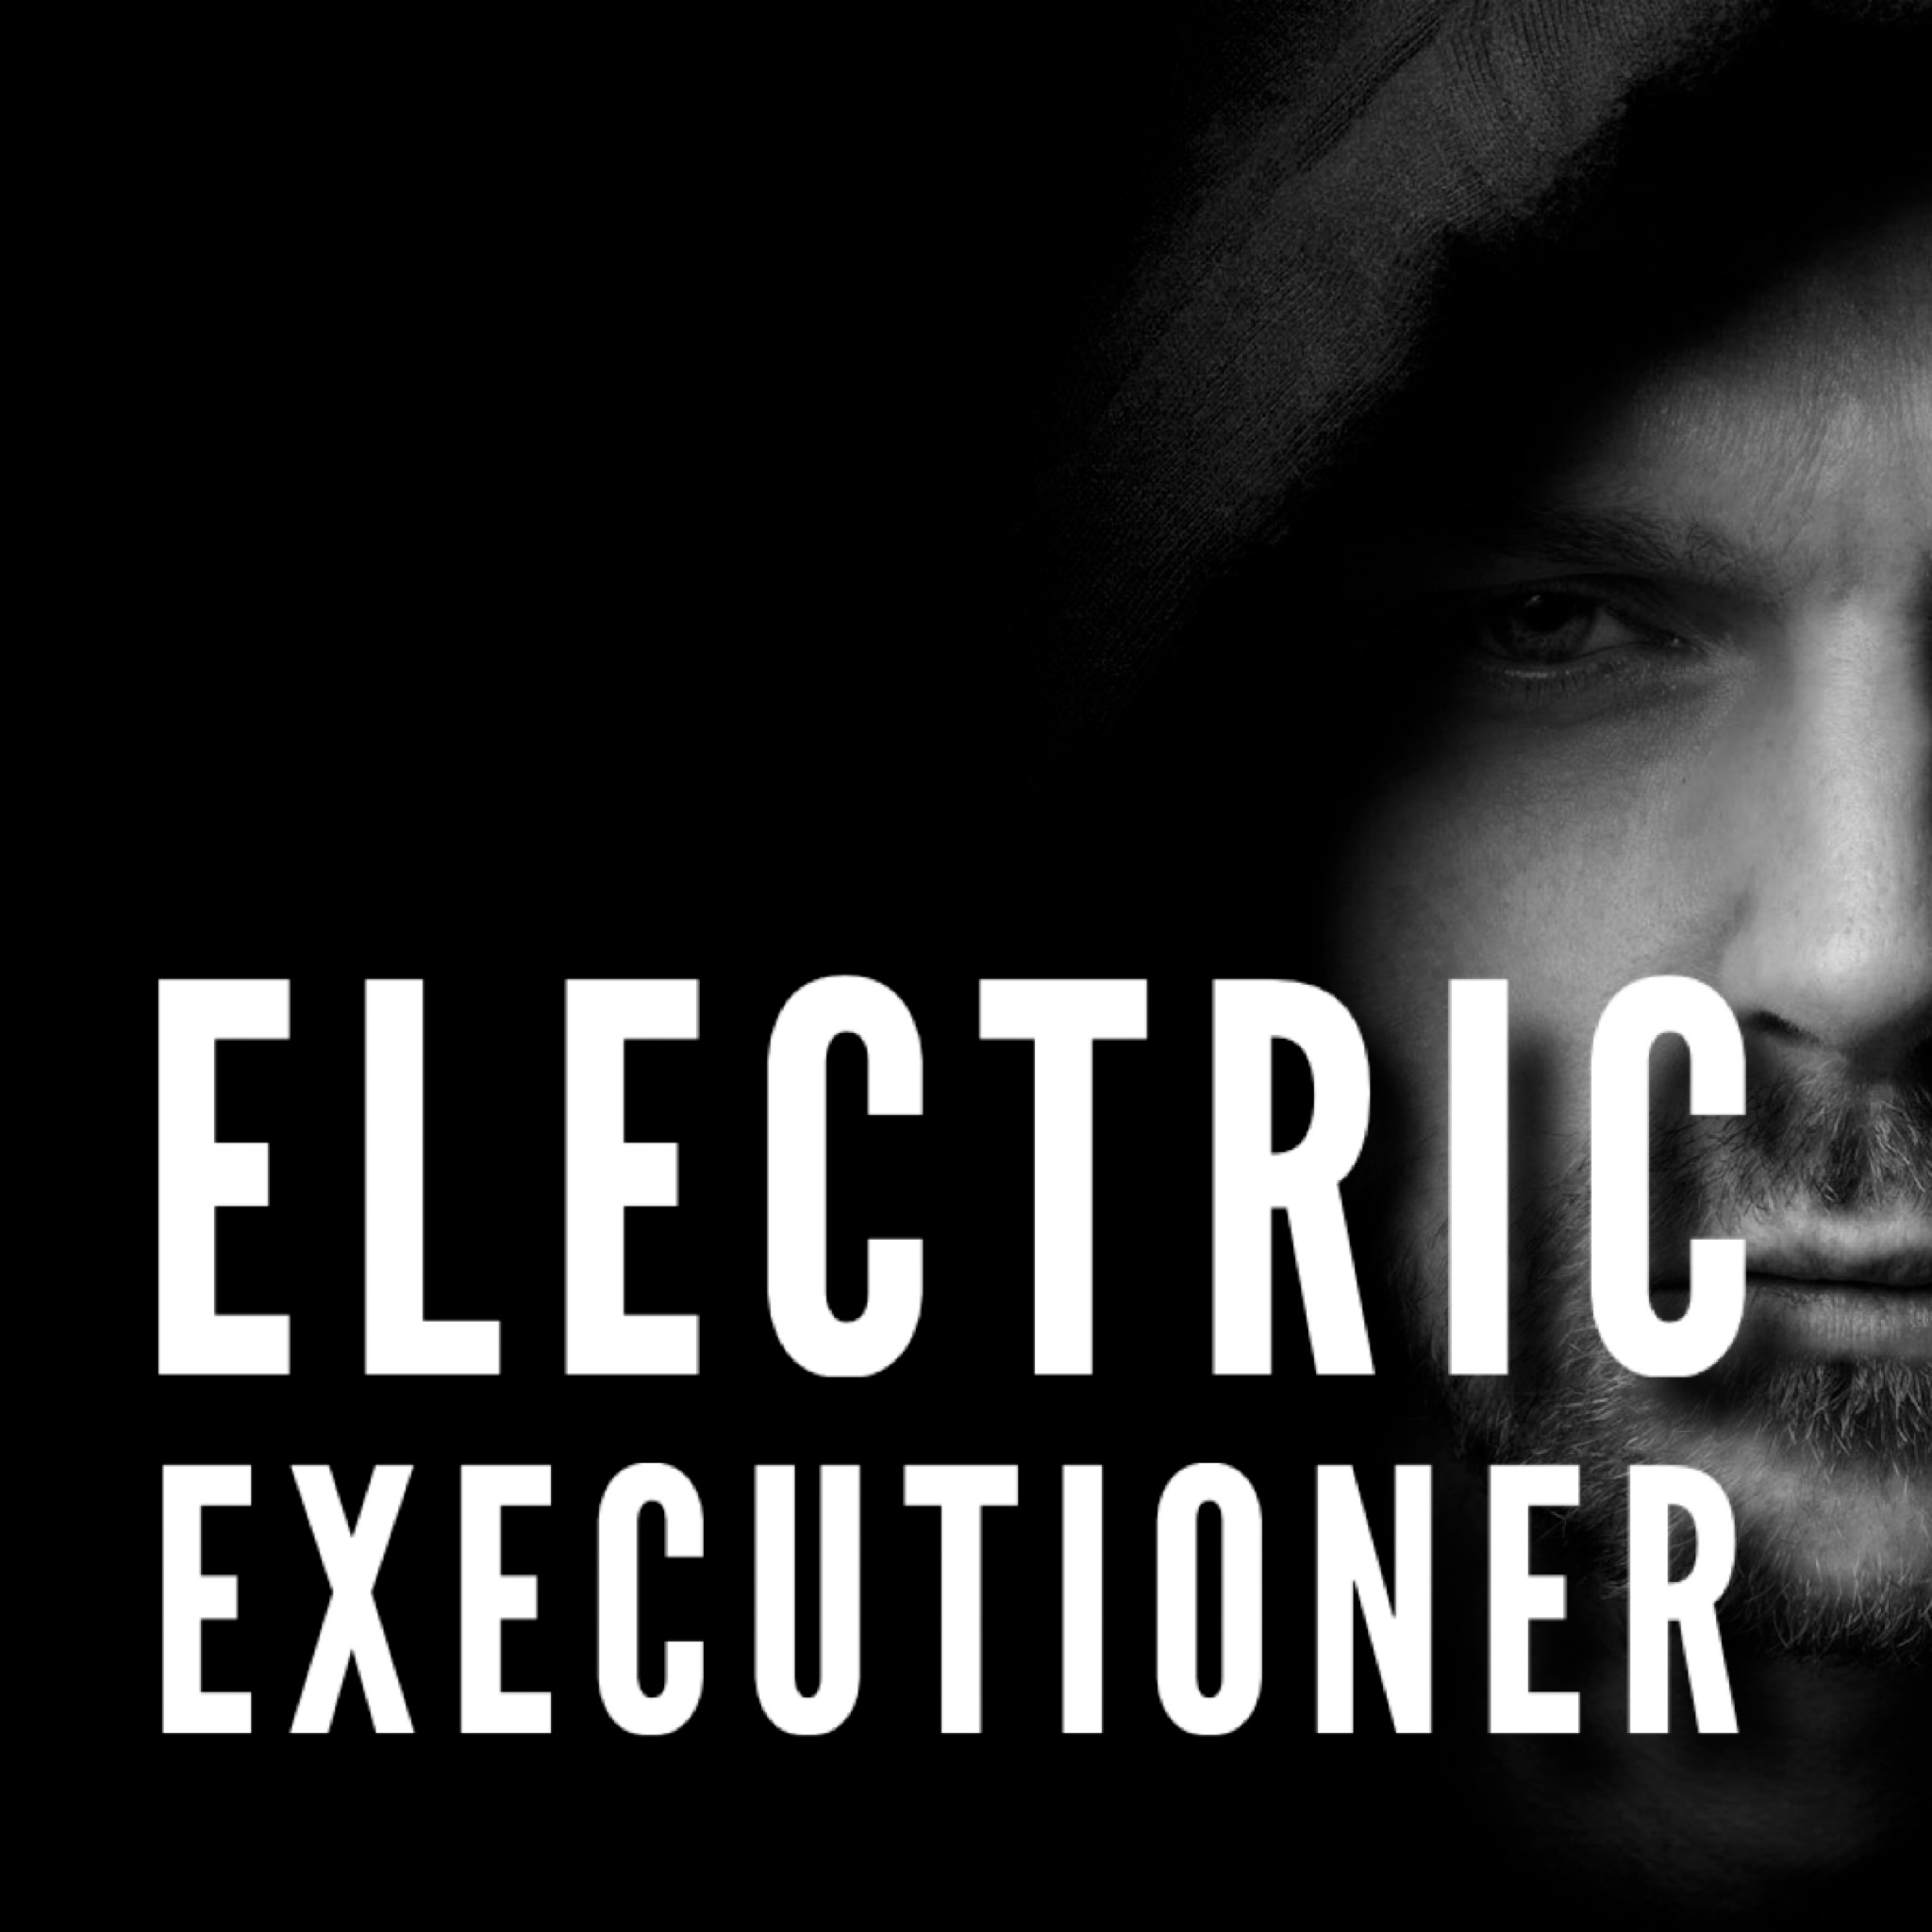 HP LOVECRAFT'S The Electric Executioner - ASMR for Chronic Pain, Insomnia, & PTSD